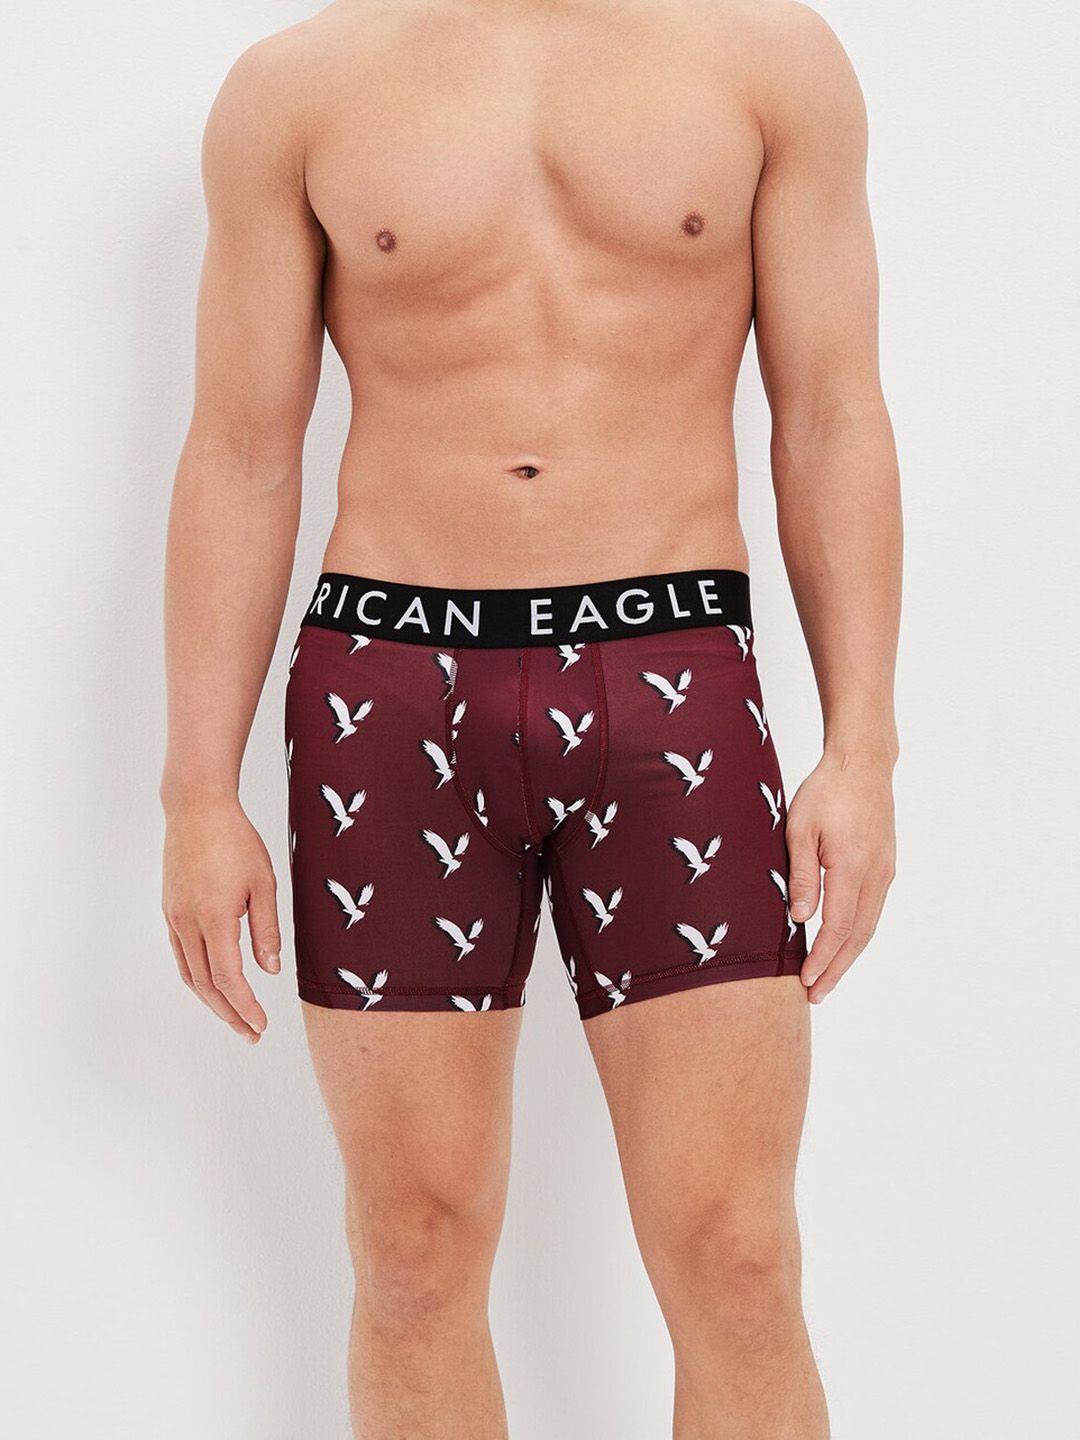 american eagle outfitters shadow eagle printed boxer-style brief wes0231452601